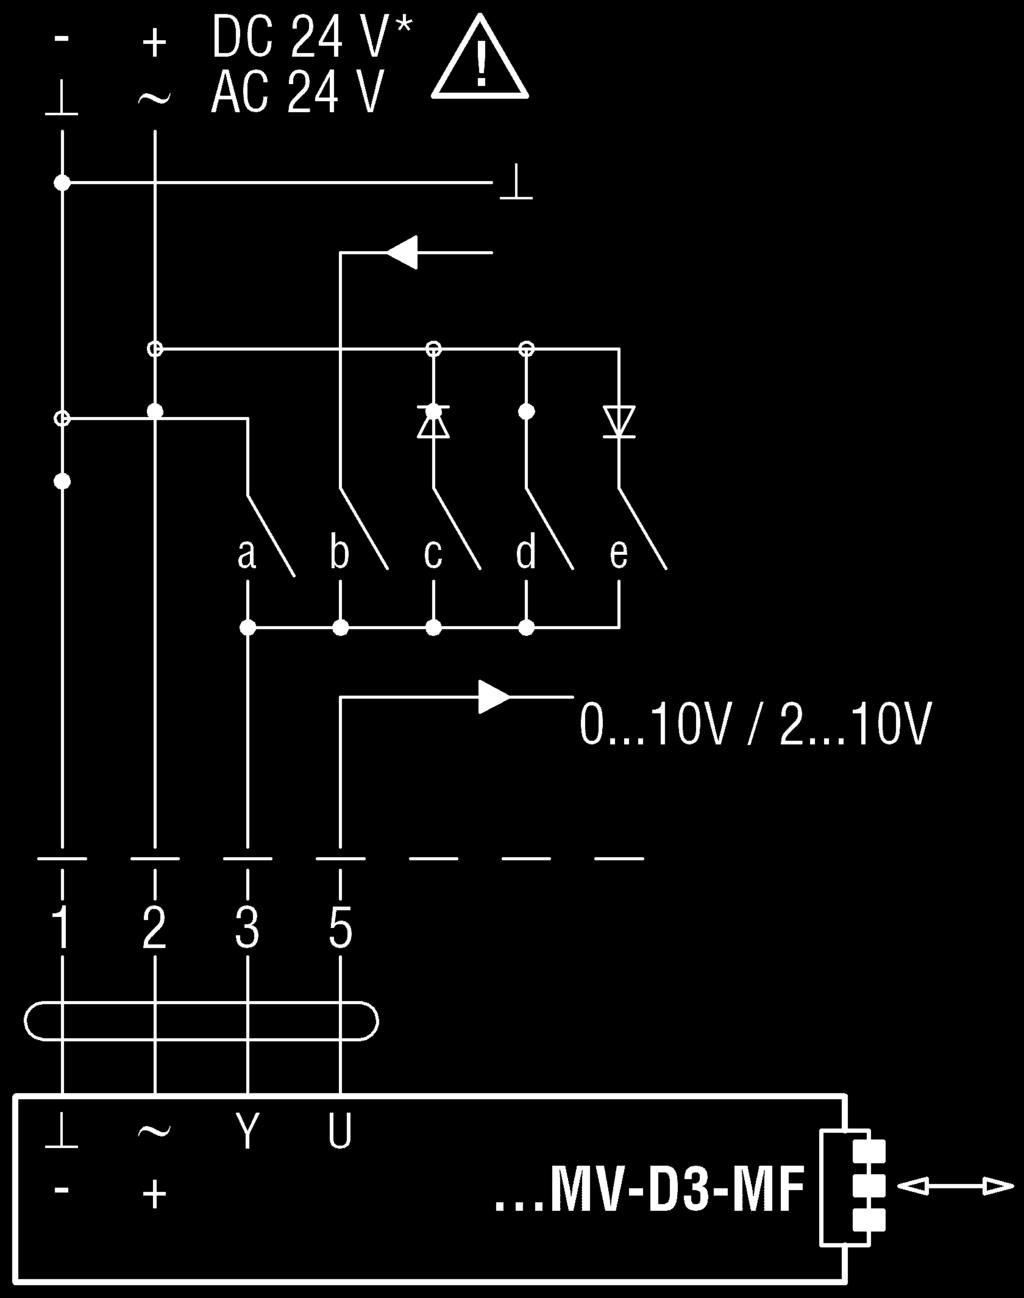 ..2 V V min V min operating stage active 2...10 V V min... V max Continuous operation V min... V max **Attention: Controller/DDC must be able to pull the command signal to 0 V.